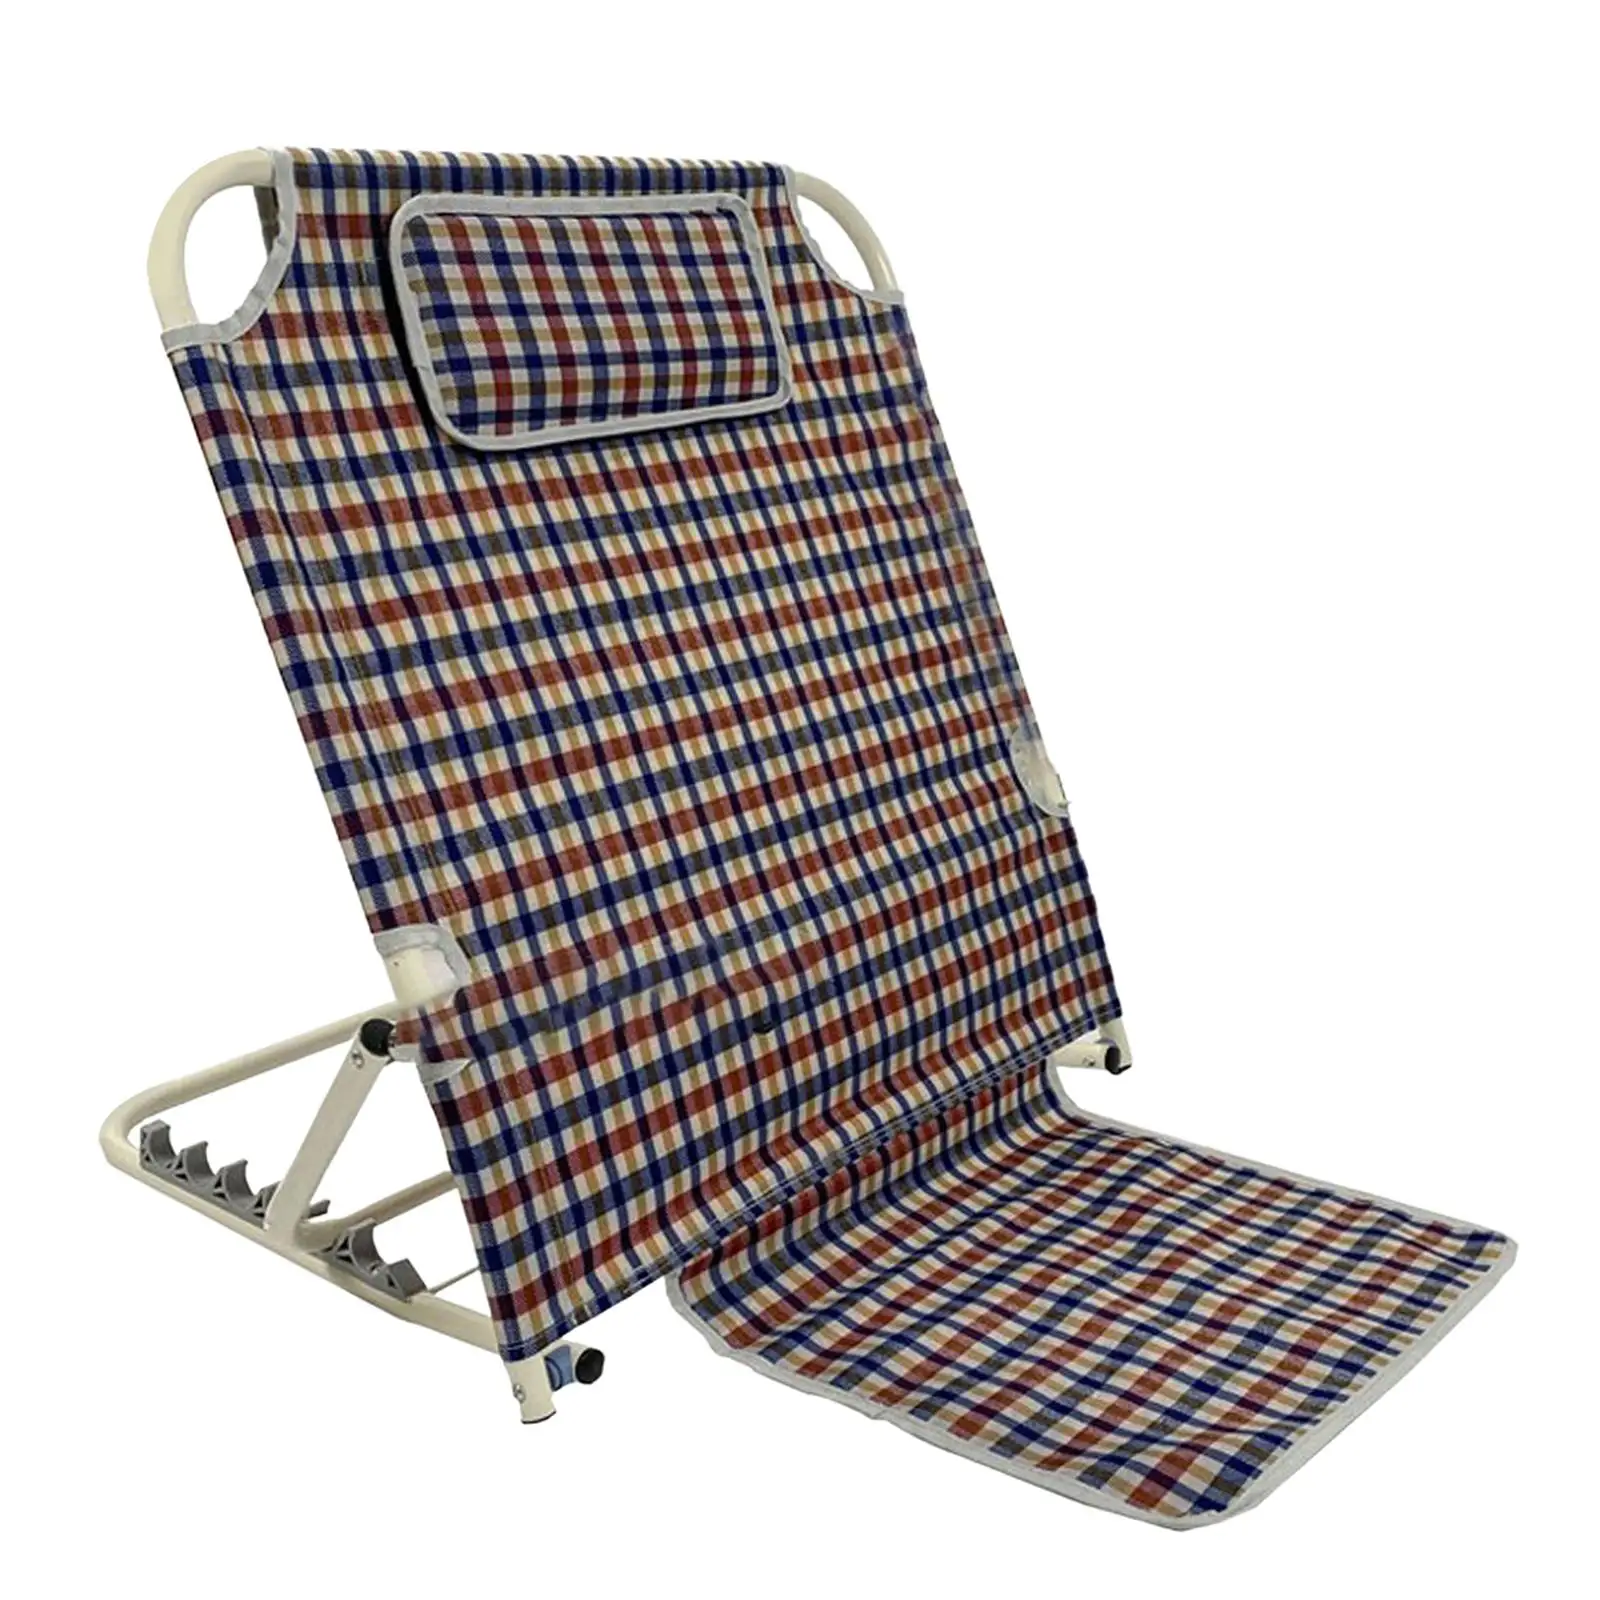 Folding Disability Bed Backrest Support with Head Cushion Beach Chair Reading Bed Rest Pillows for Elderly Adults Neck Head